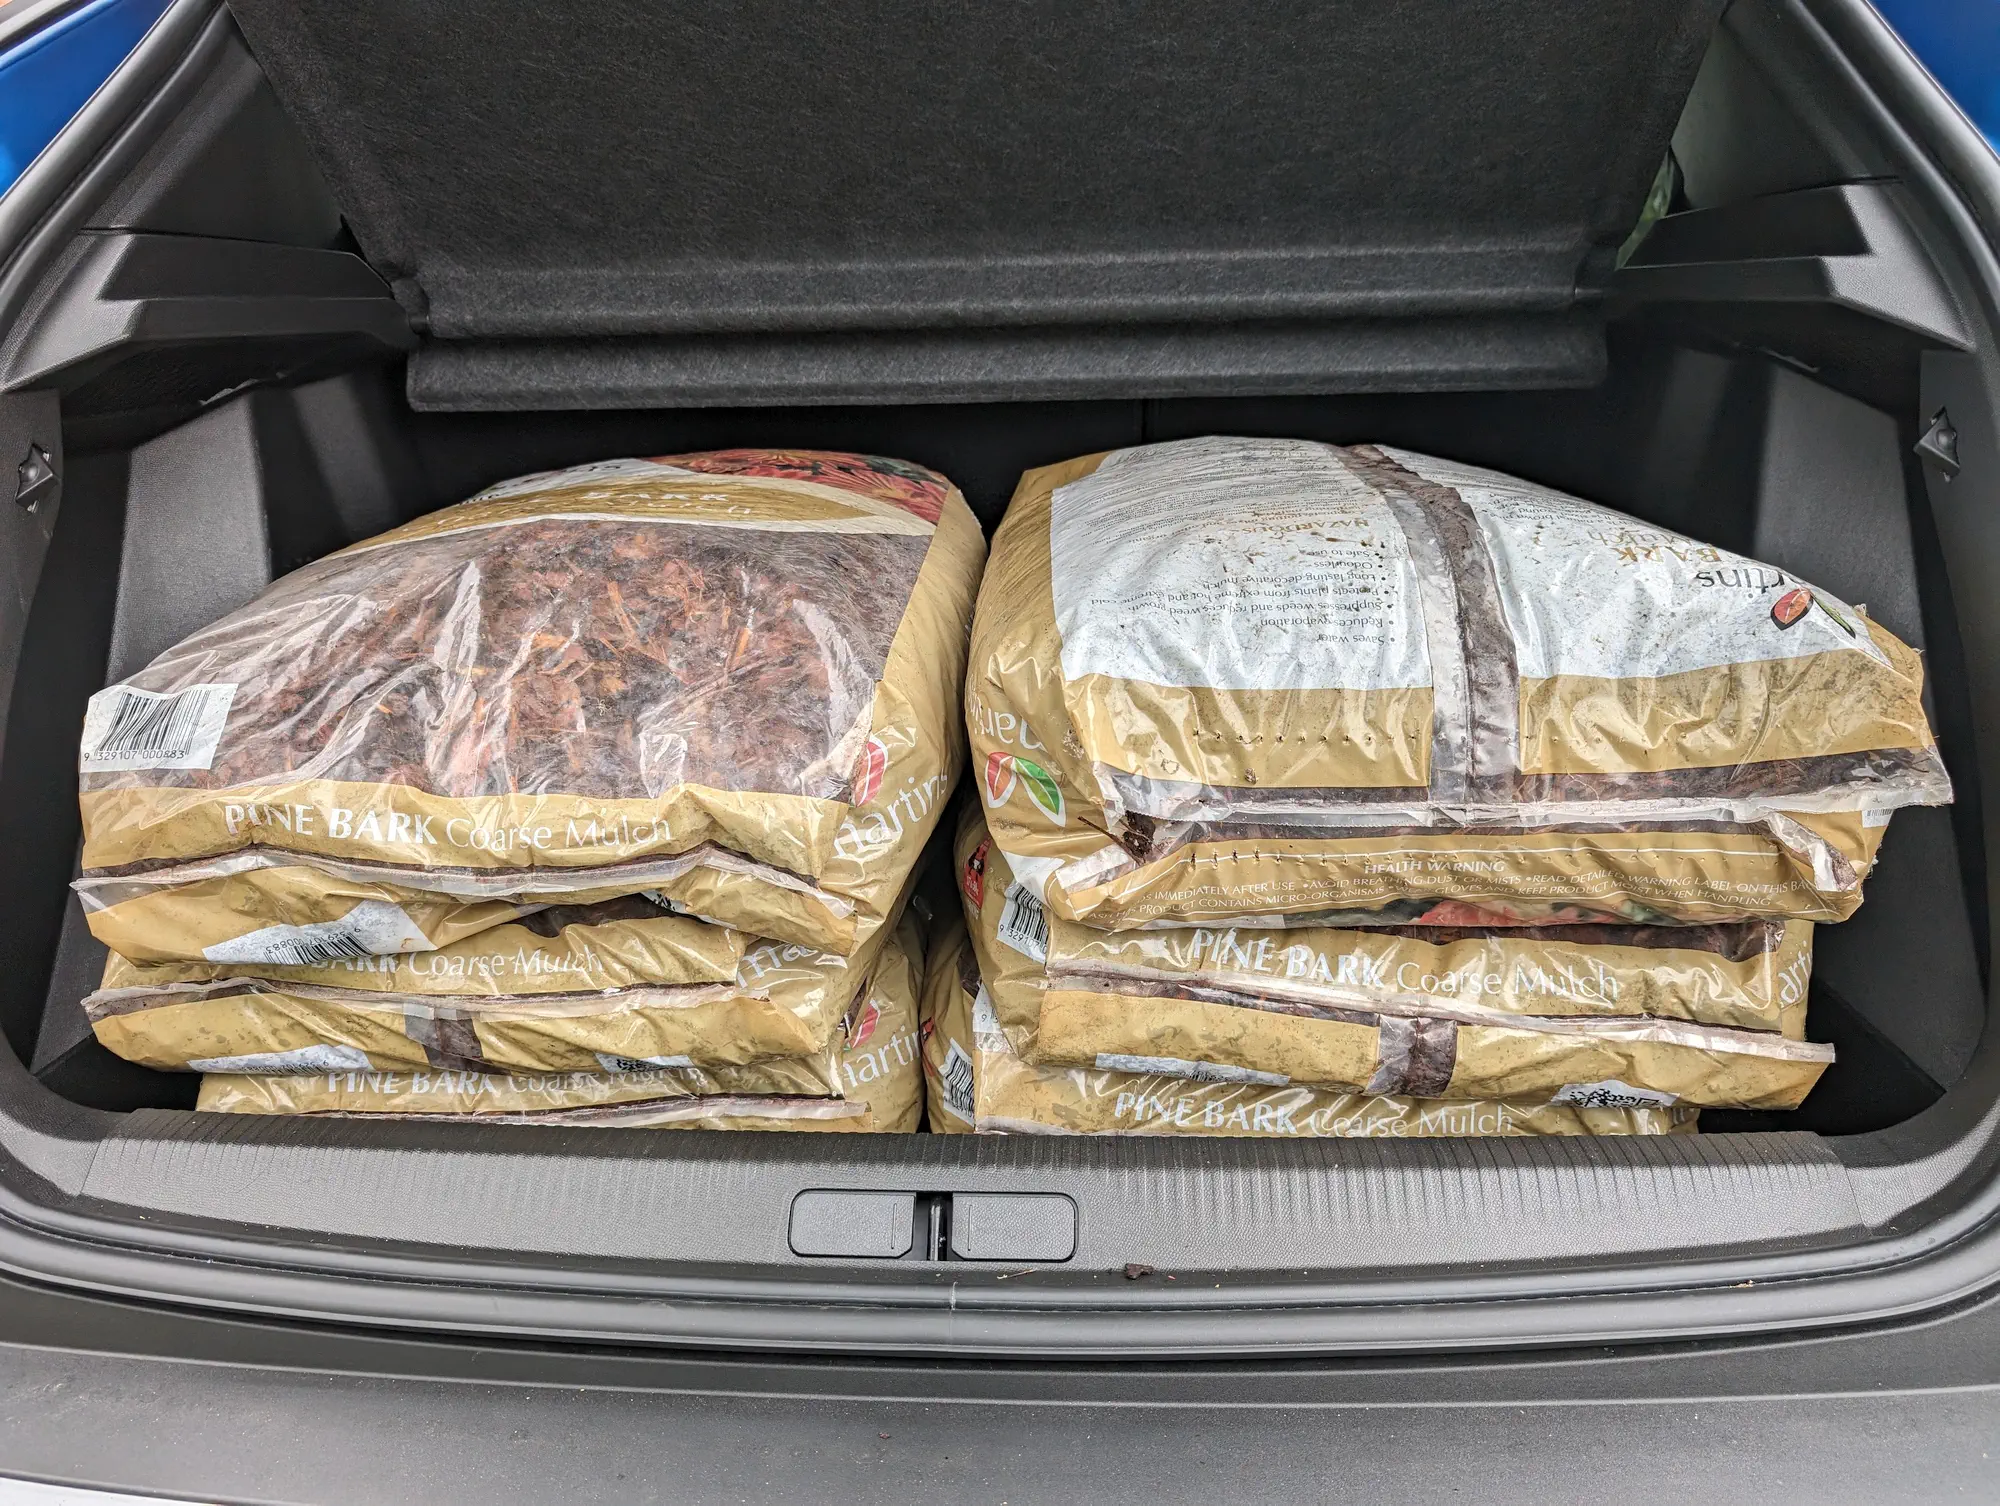 Australian Peugeot e-2008 2023: how much luggage, shopping and mulch fits in the boot and frunk?